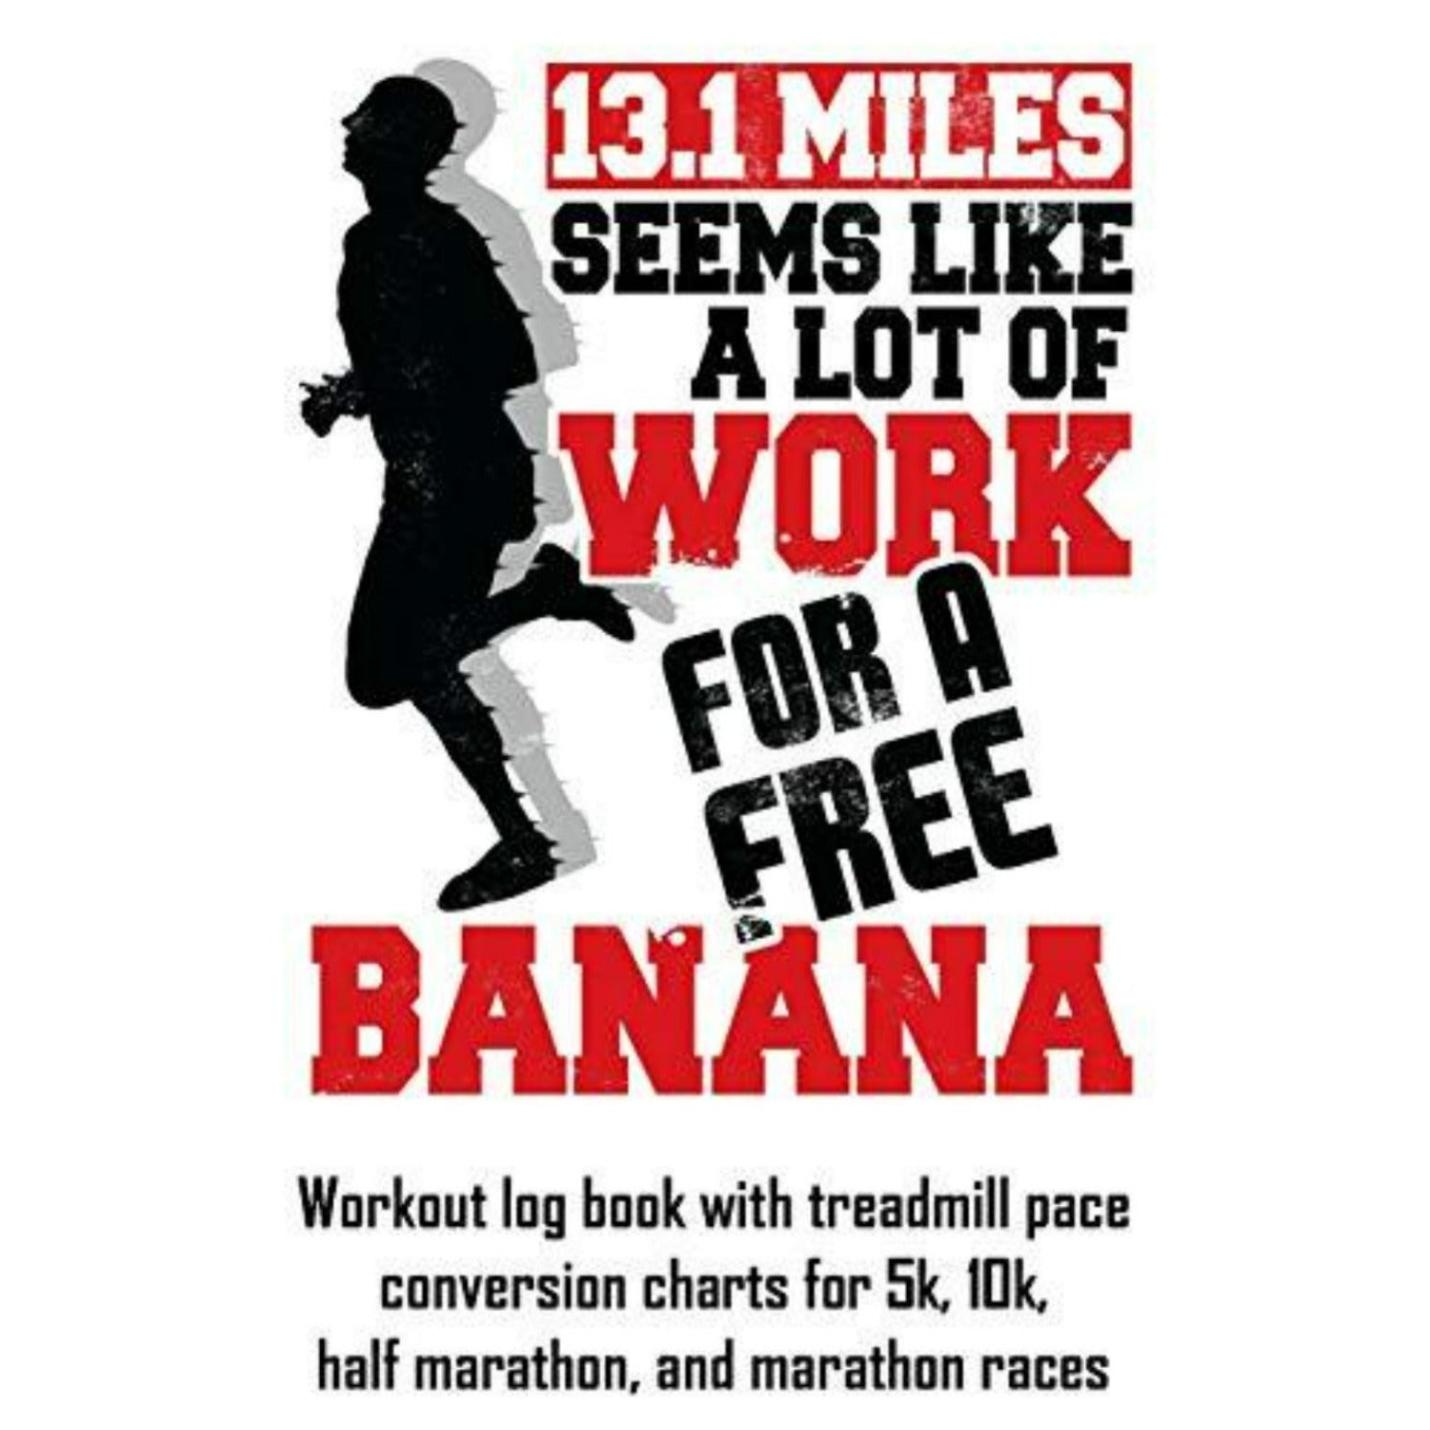 "131 miles seems like a lot of work for a free banana" workout log book with treadmill pace conversion charts.